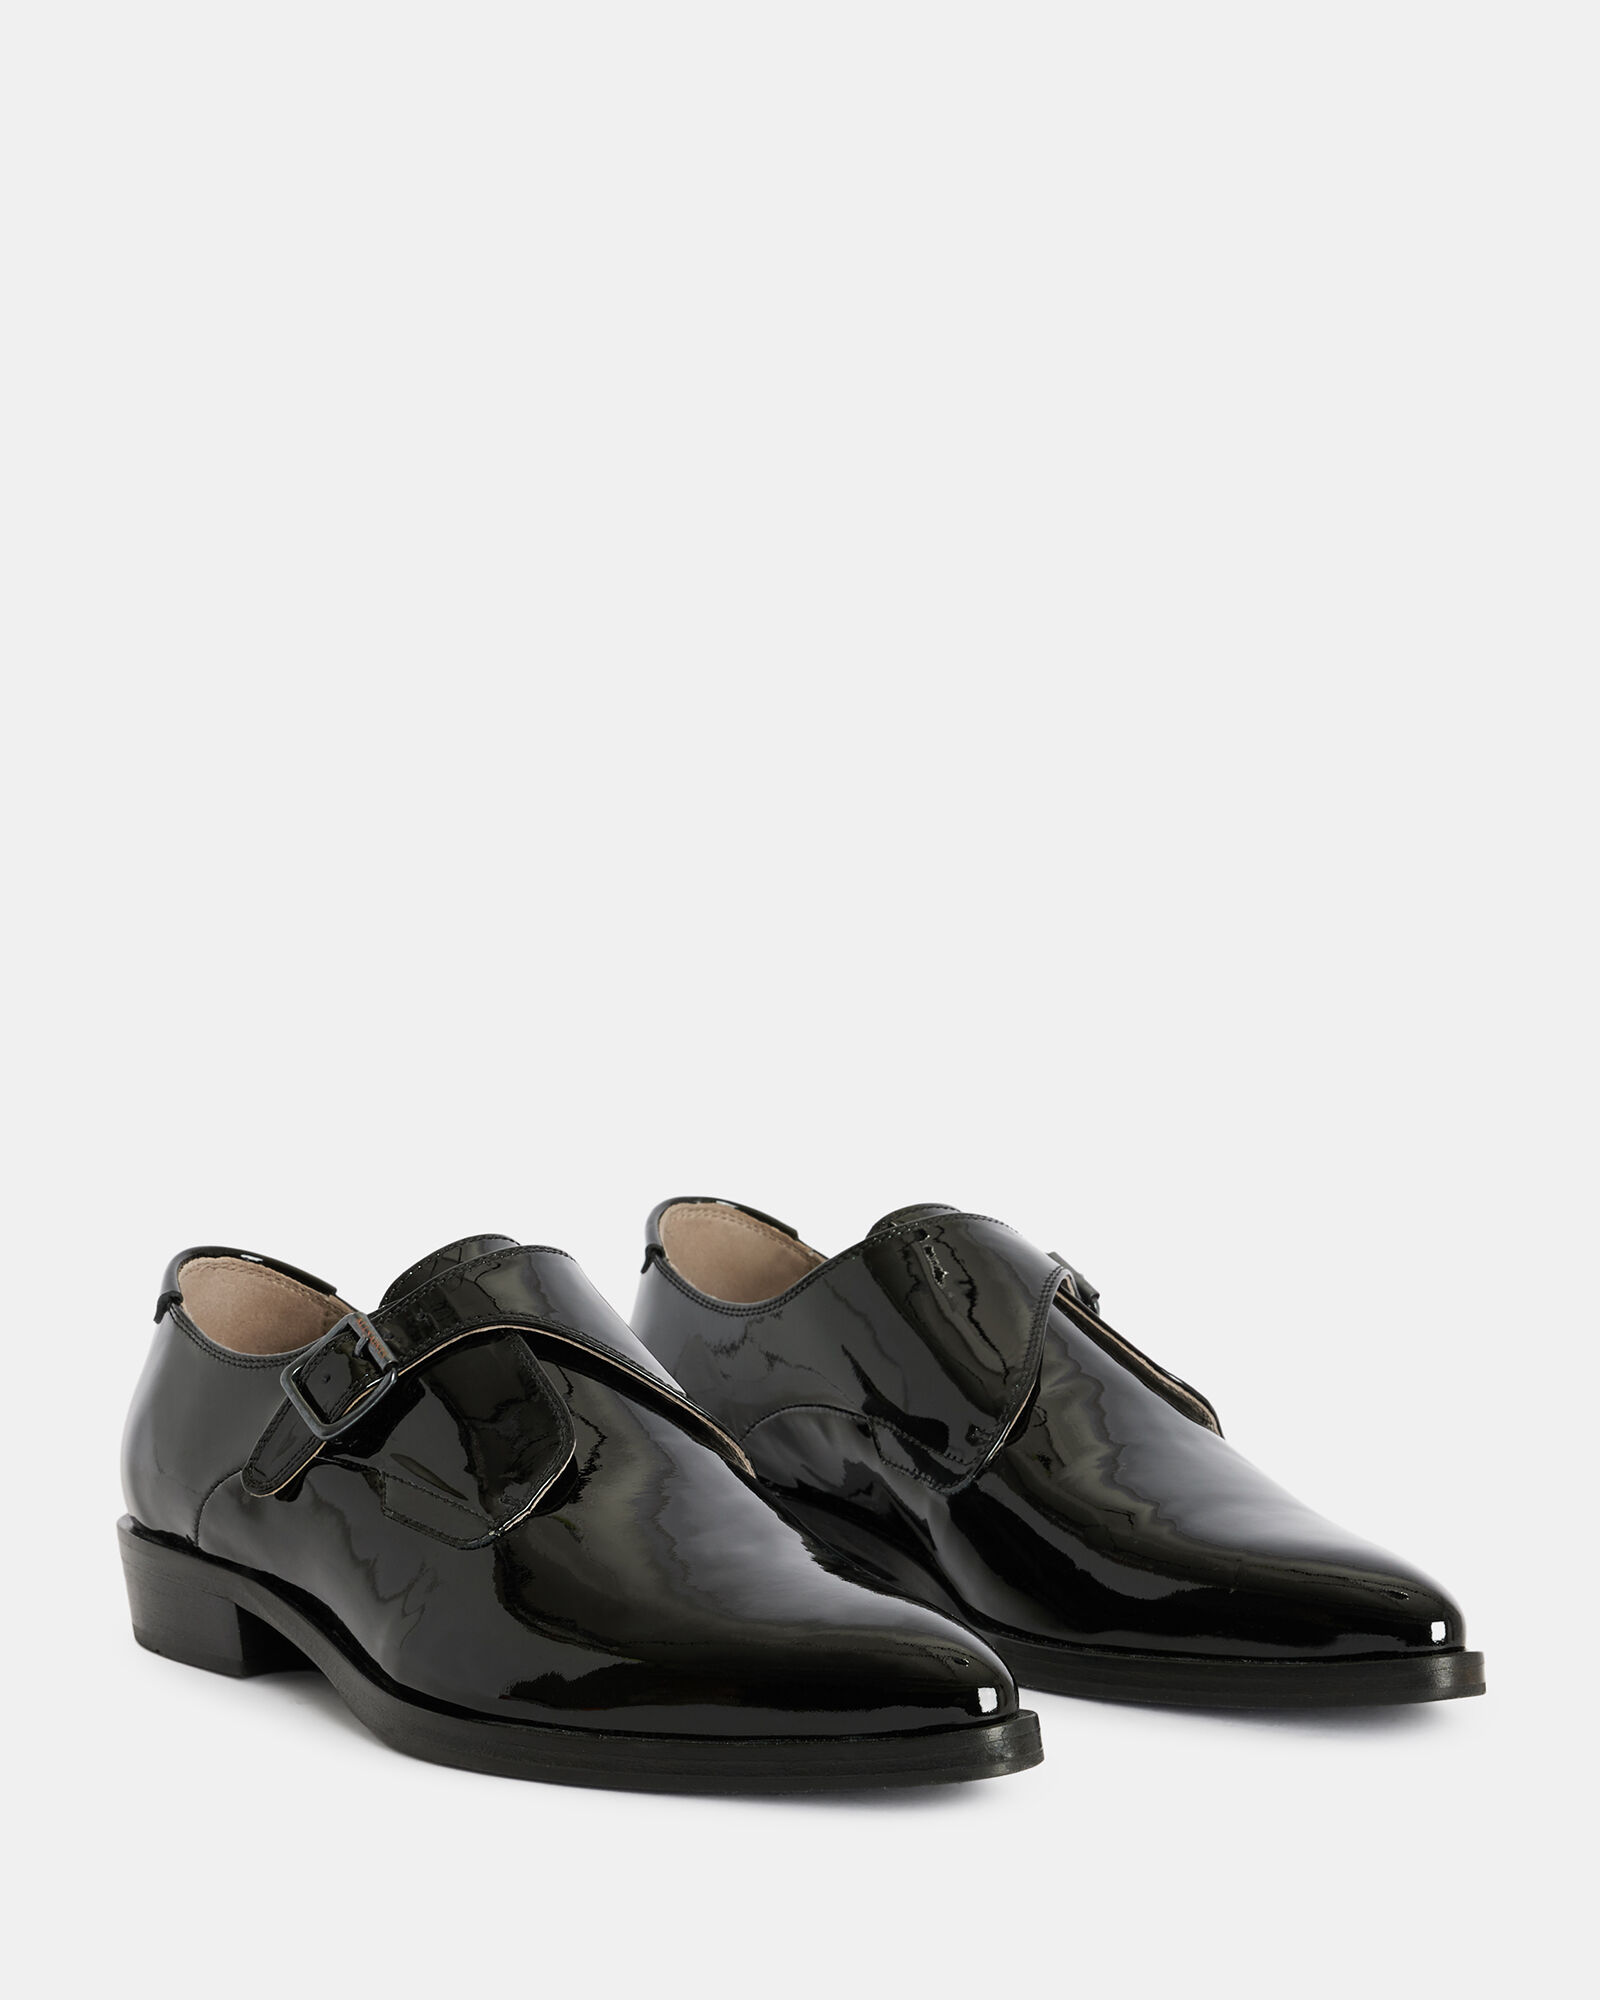 Keith Patent Leather Monk Shoes